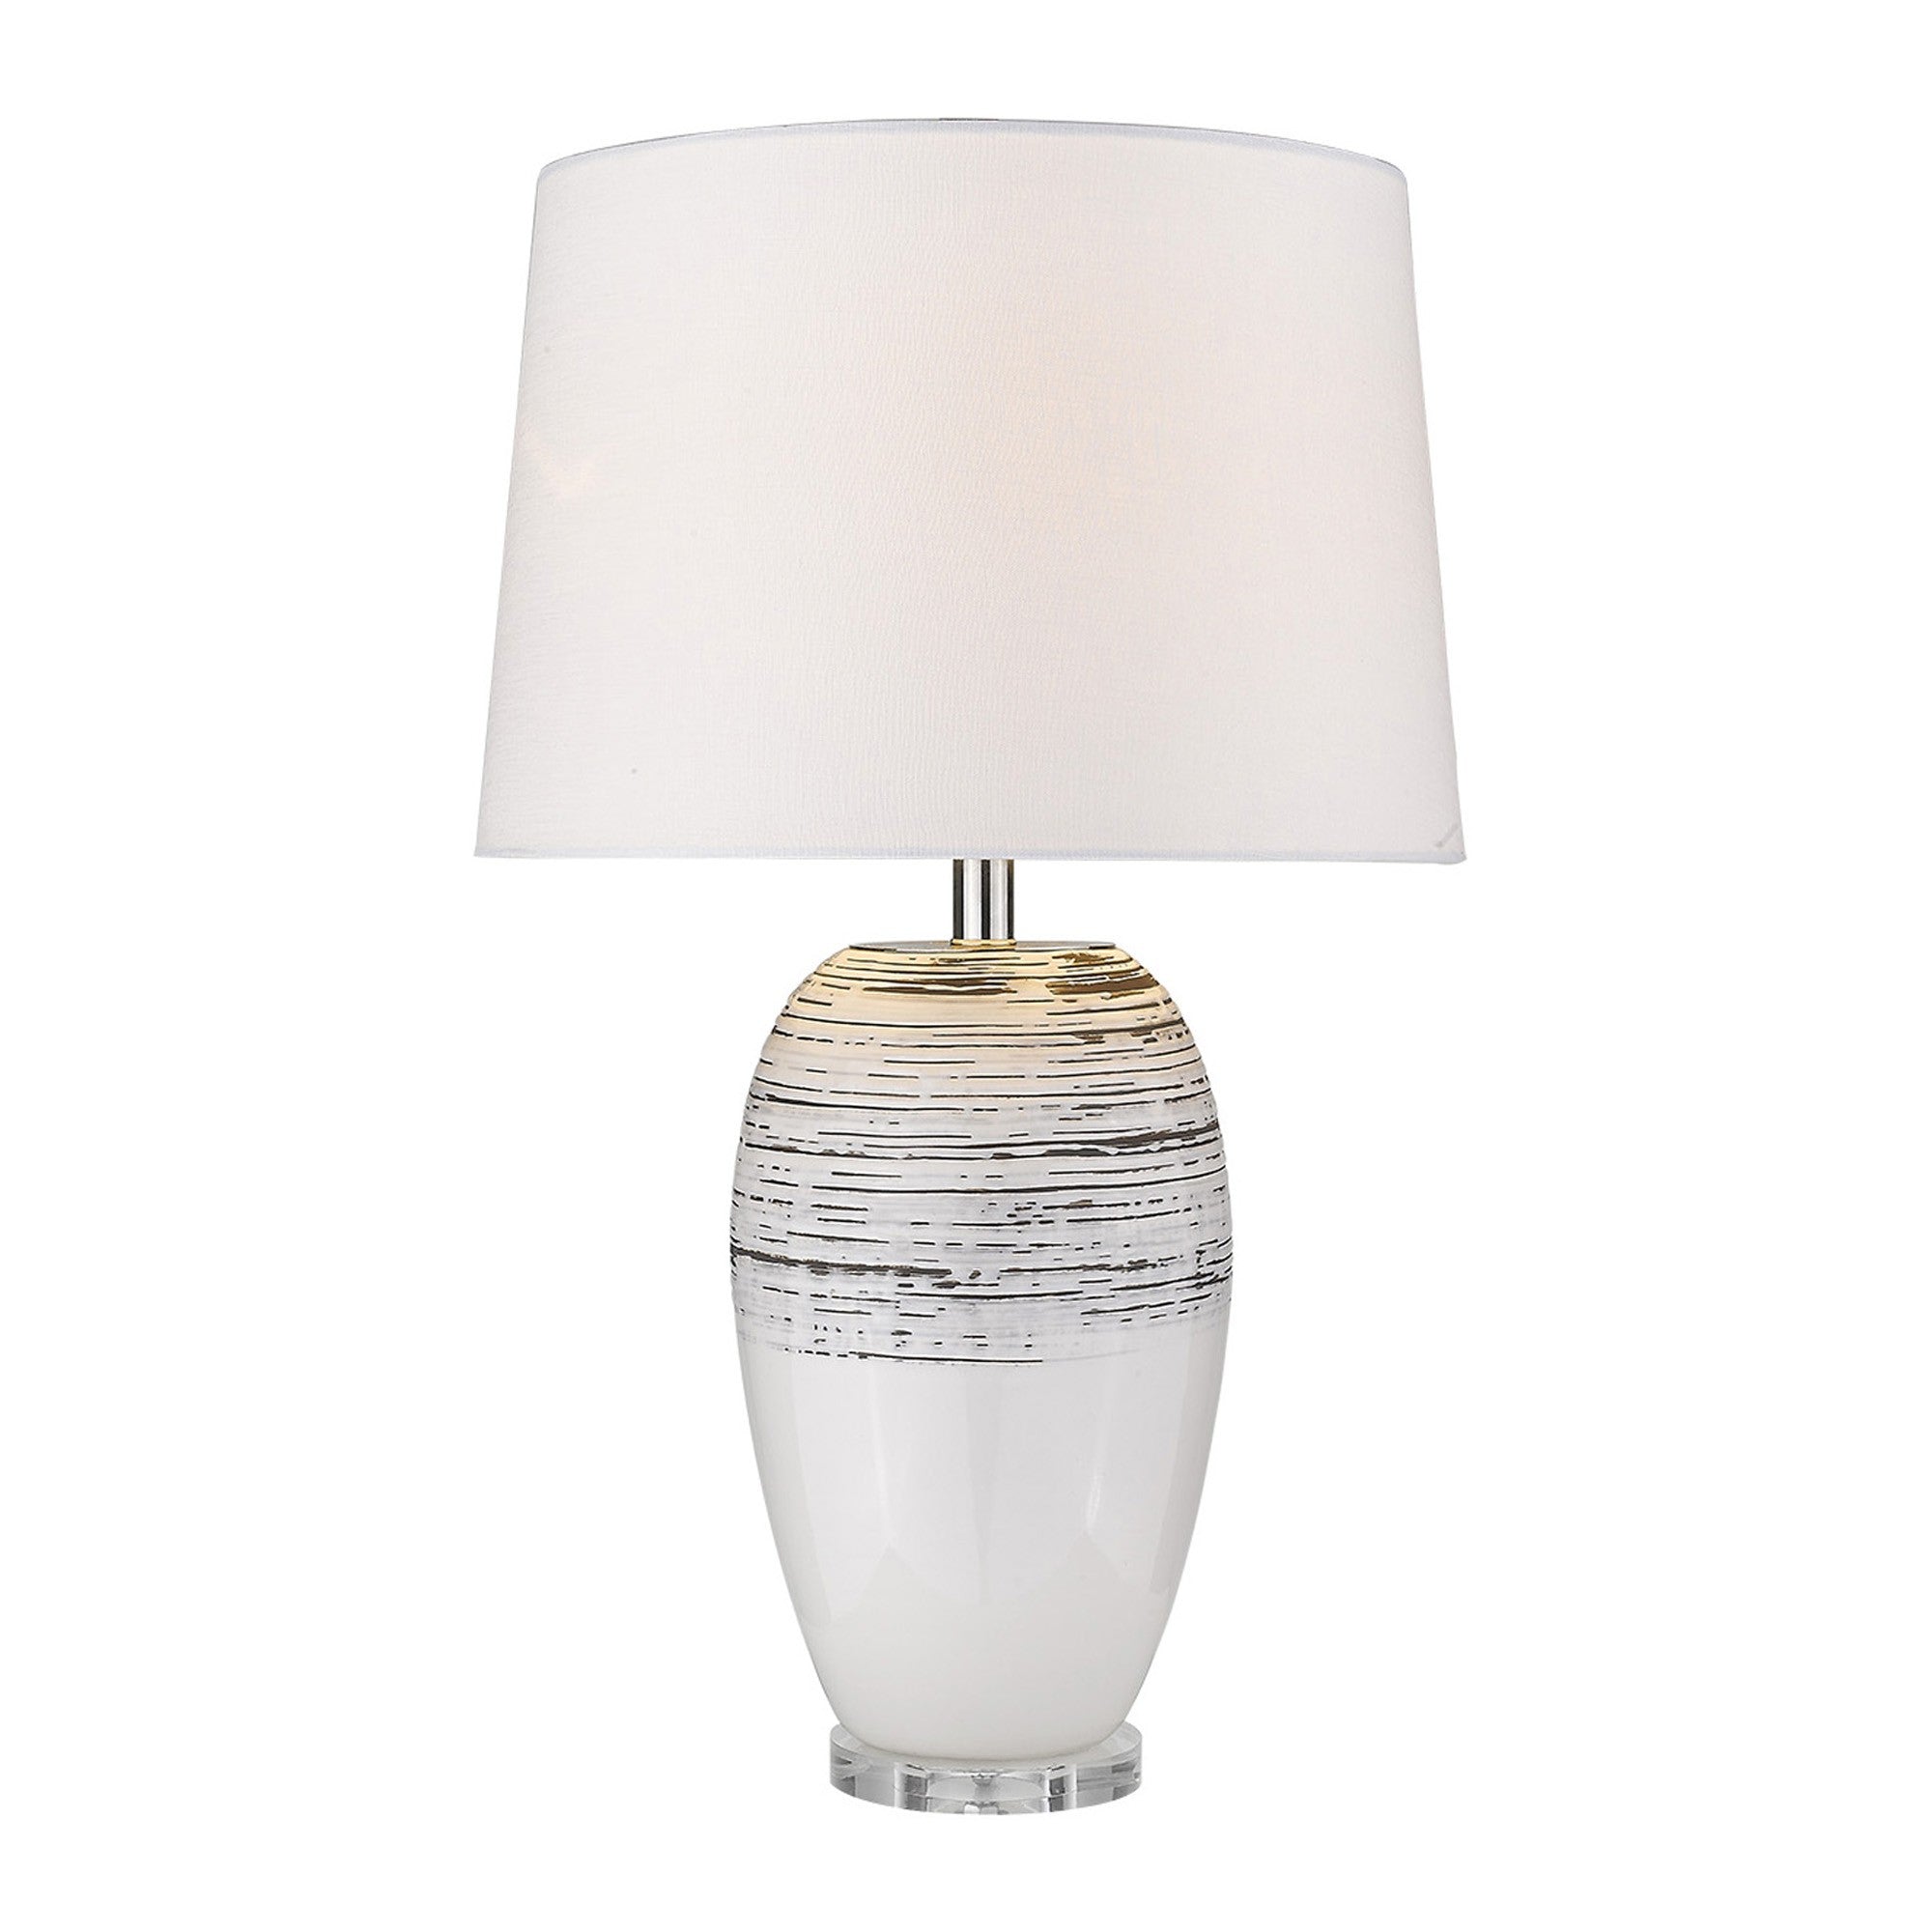 27" Clear Ceramic Table Lamp With White Empire Shade